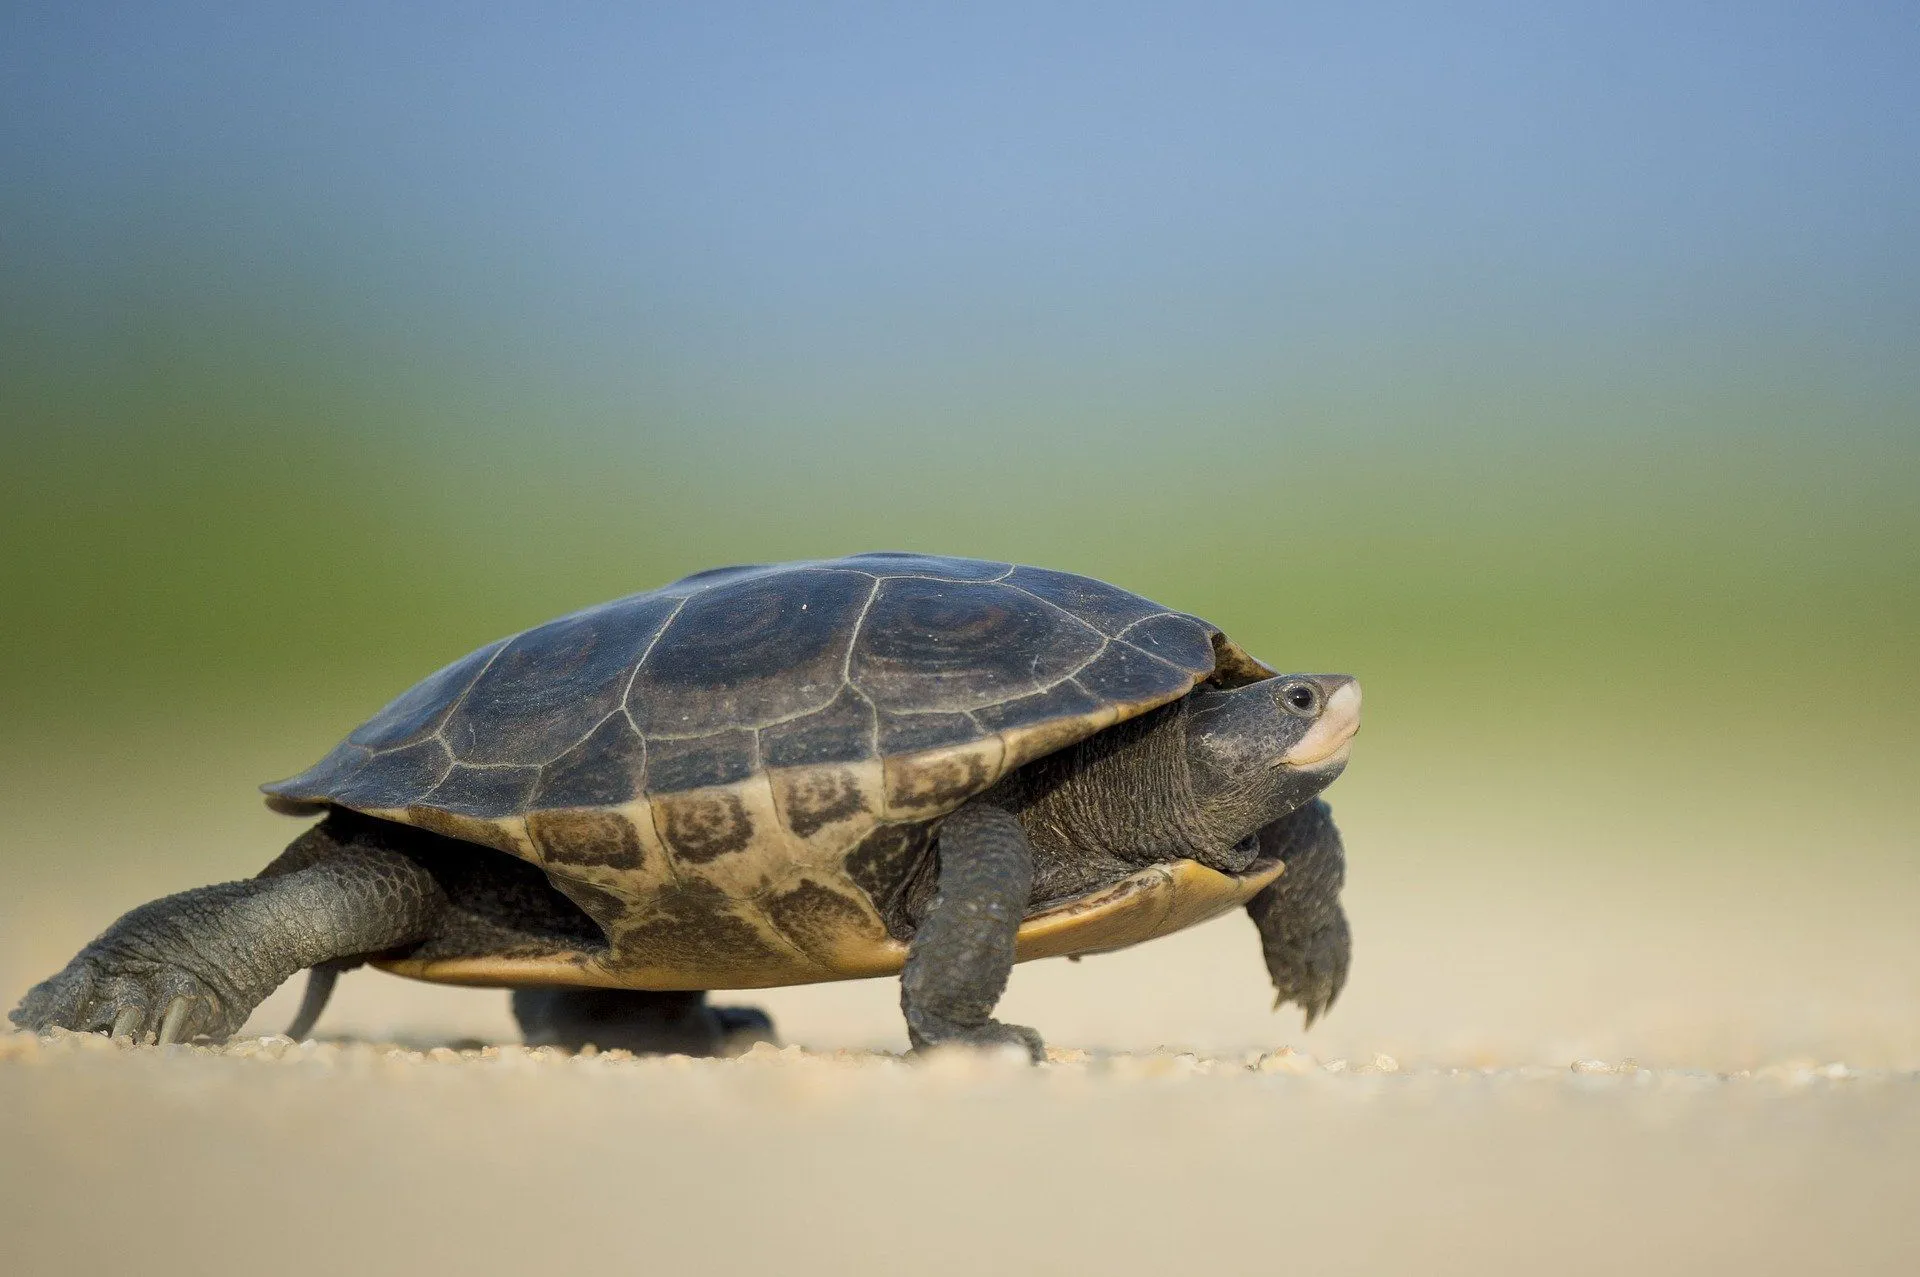 The size and species of turtles majorly impact their diet.